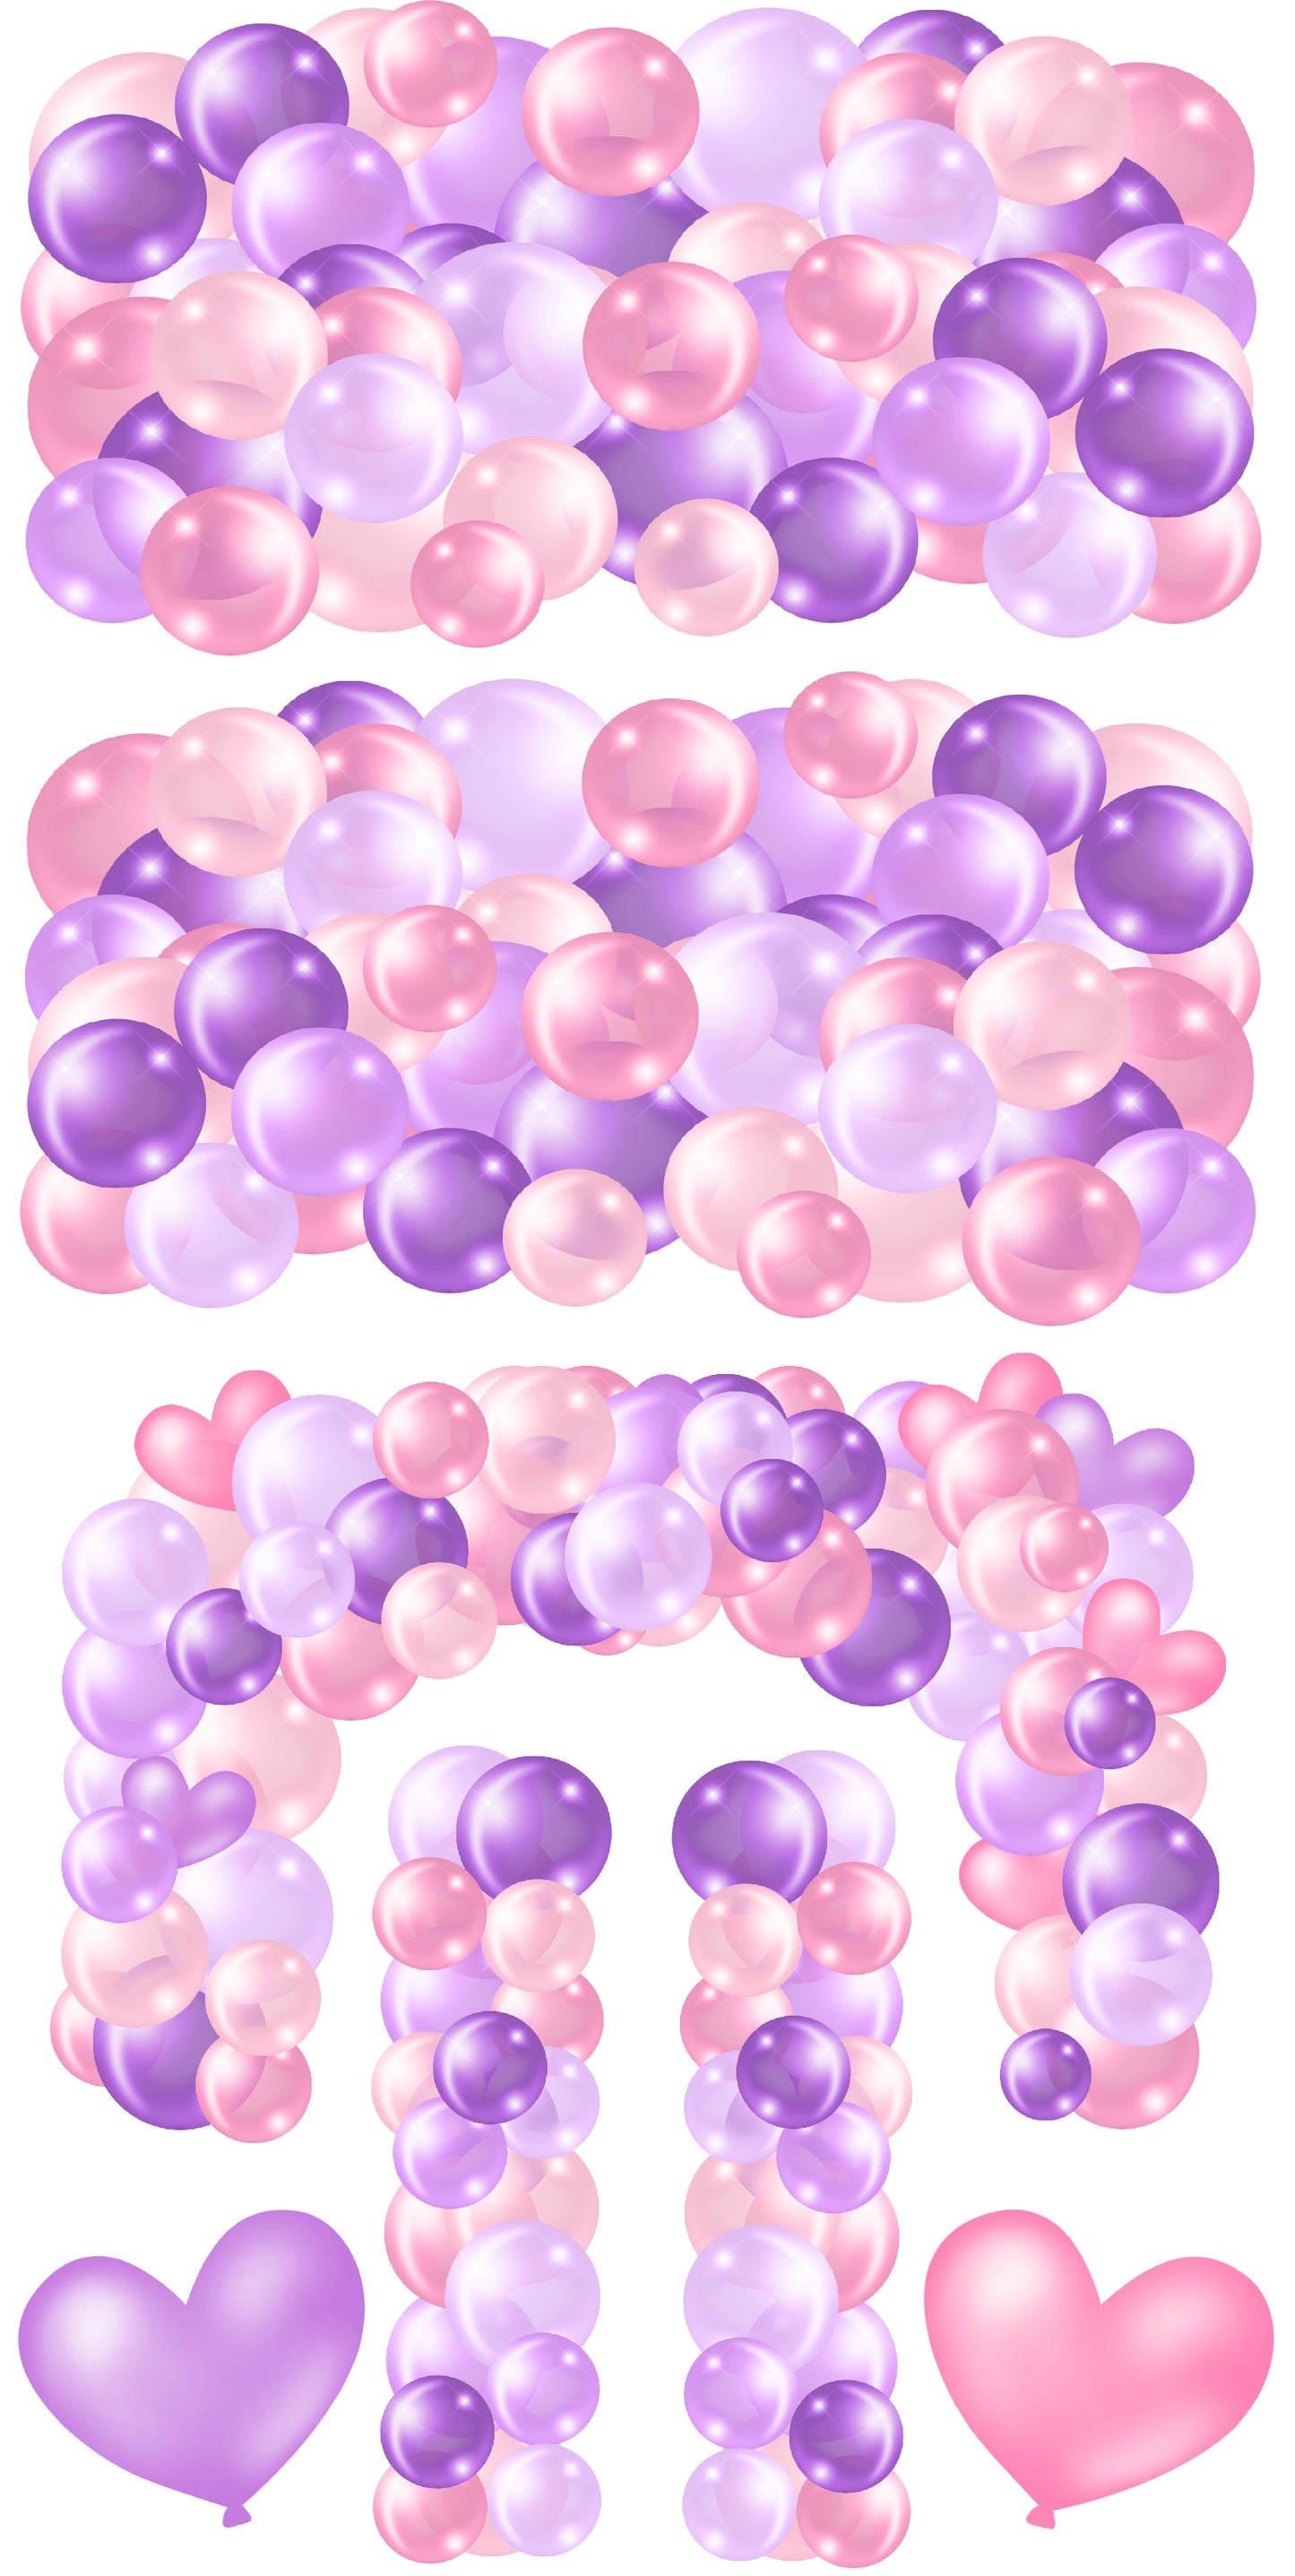 Pink and Purple Balloons Bunches Skirts, Ez Fillers, Arch, and Column